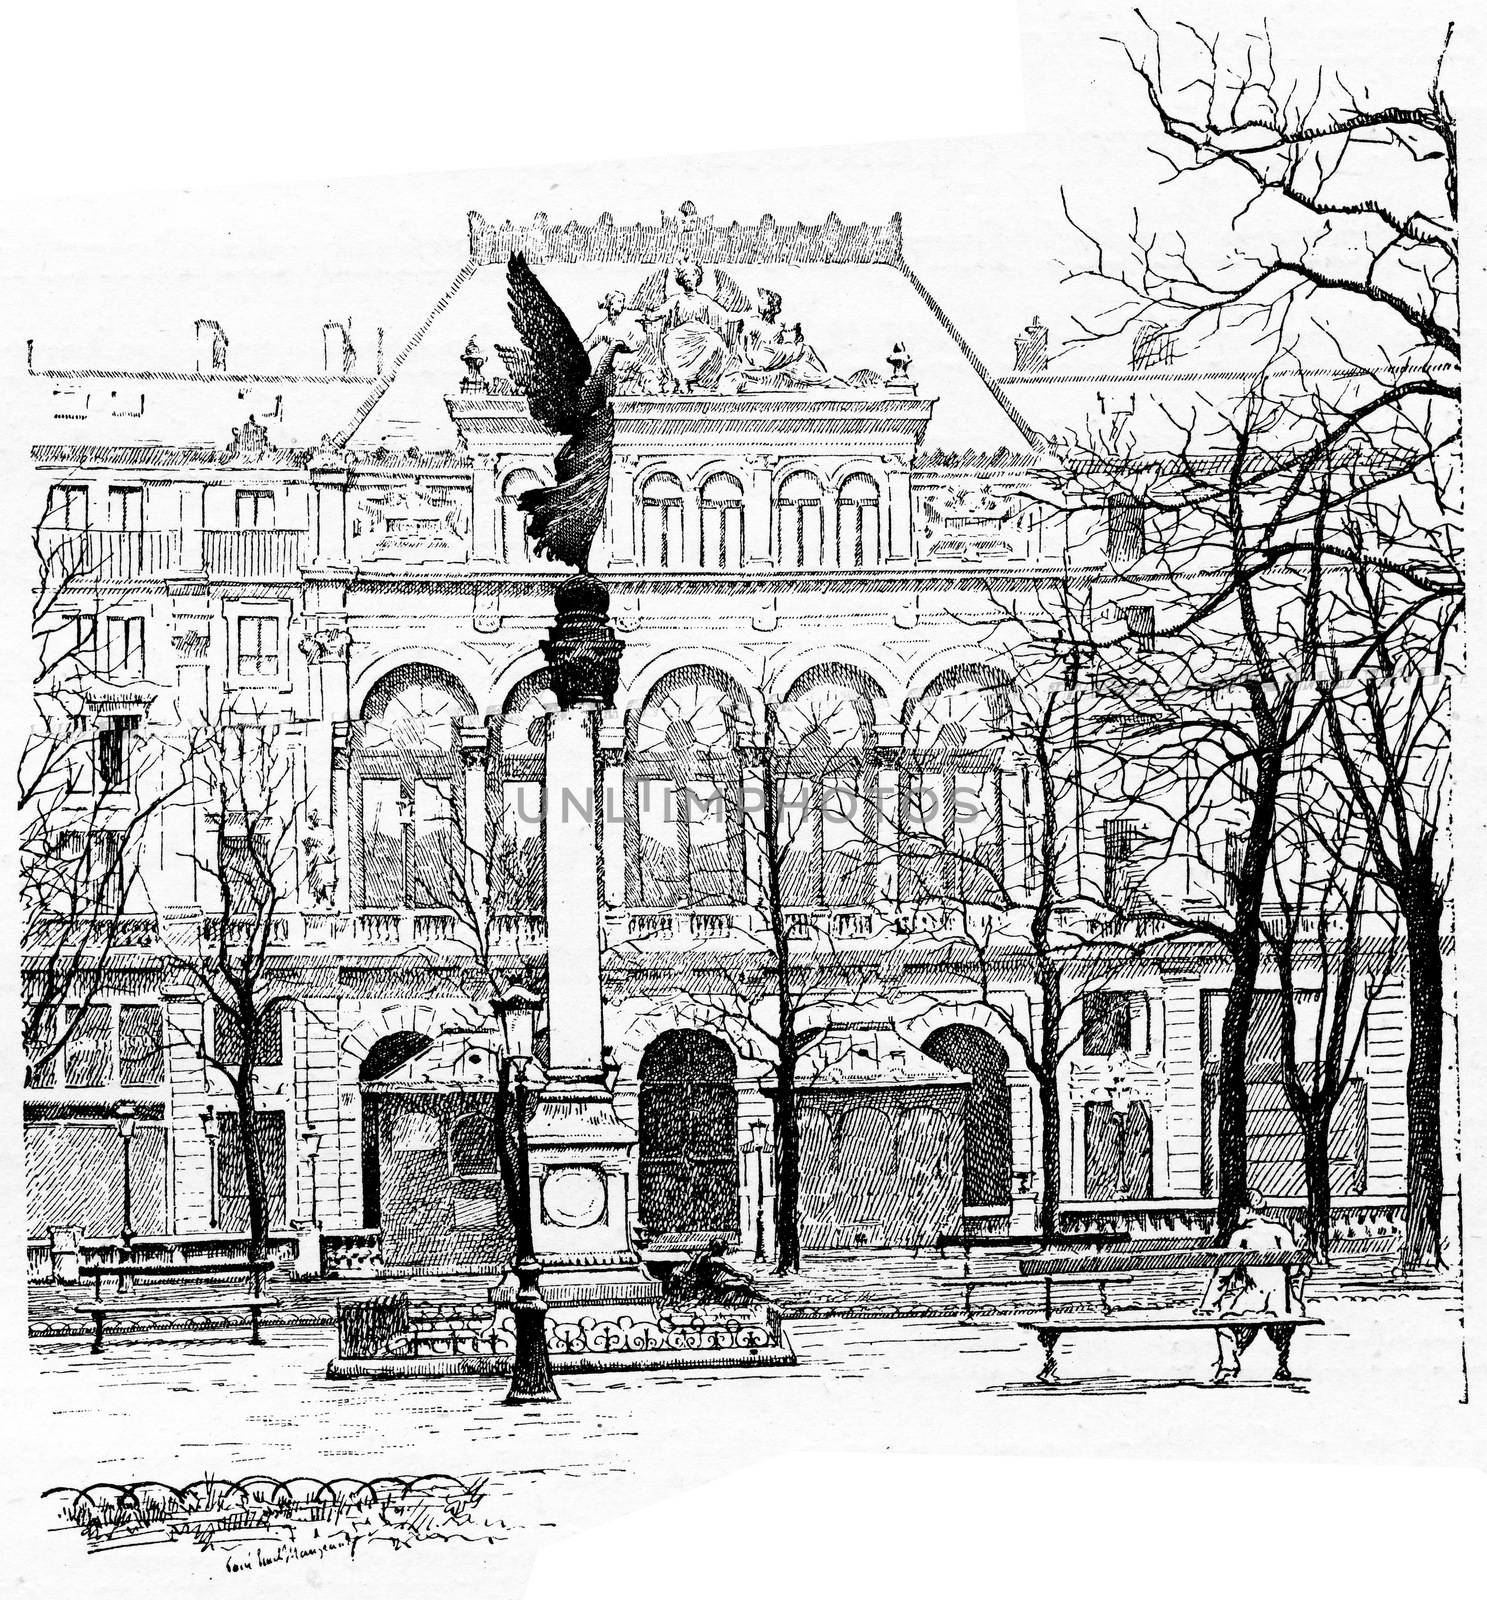 Facade of Gaiety Theatre, for the Square of Arts and Crafts, vintage engraved illustration. Paris - Auguste VITU – 1890.